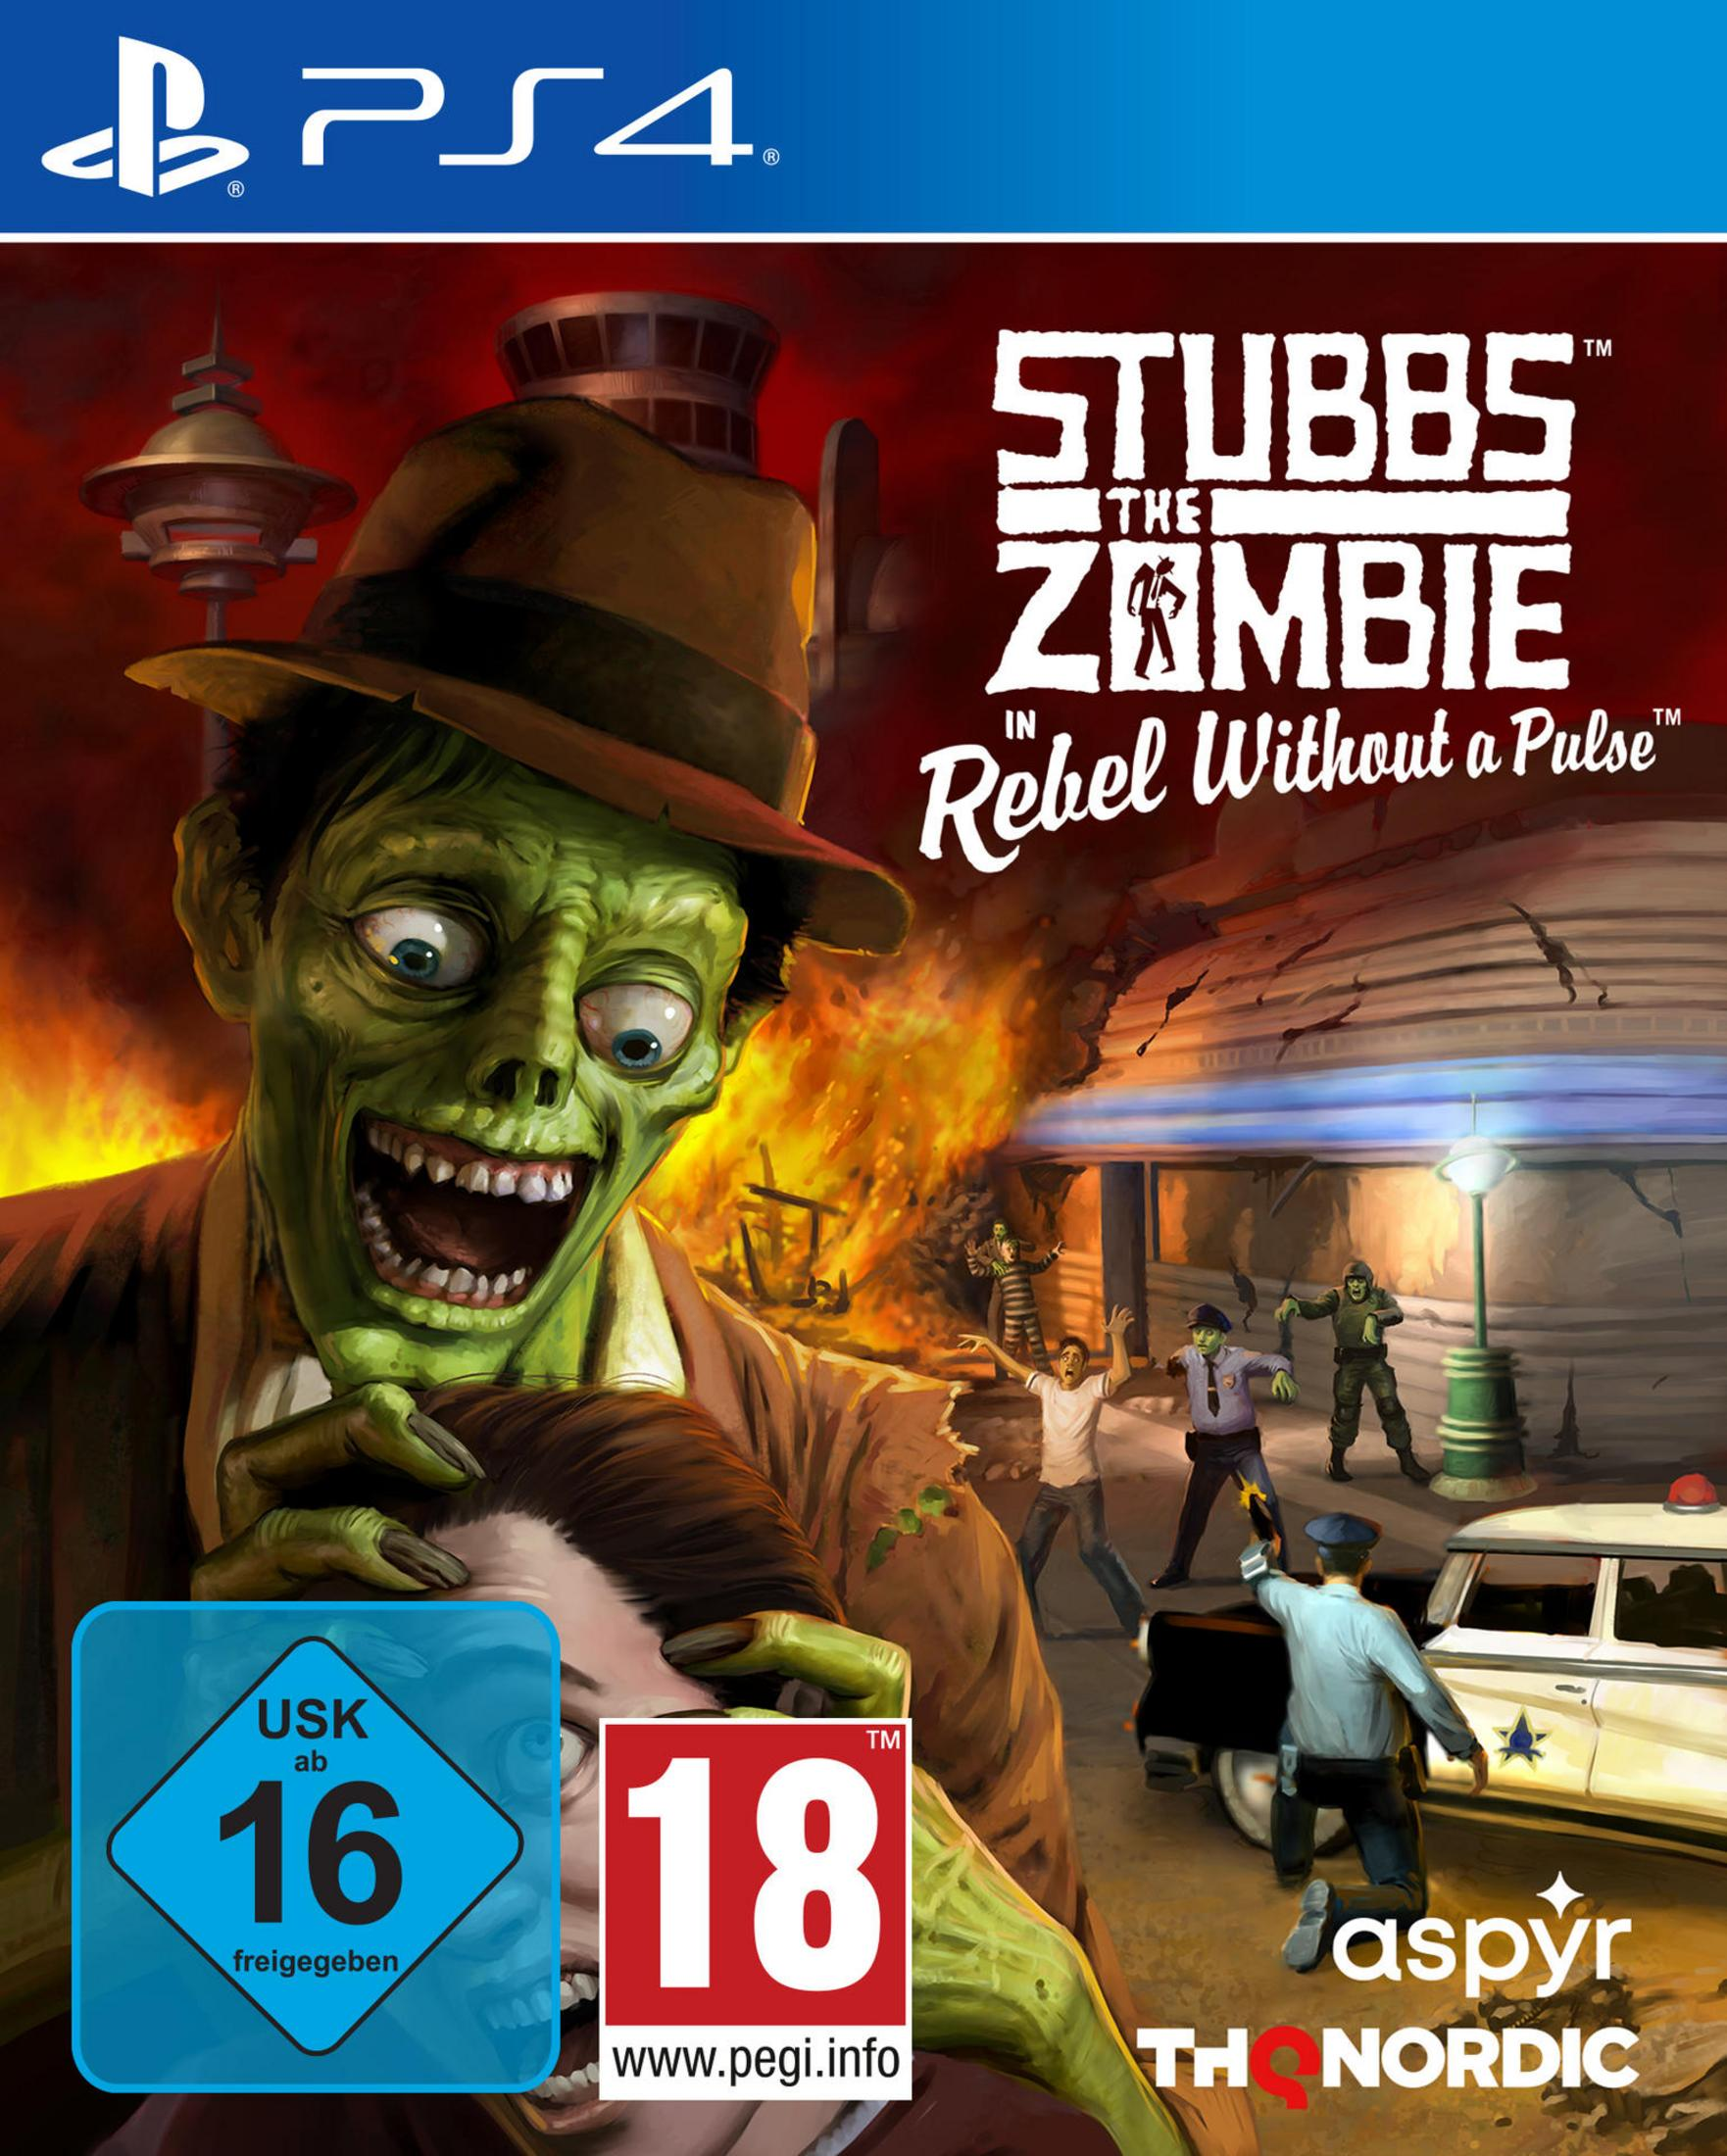 Zombie Without Pulse PS-4 Rebel a Stubbs in 4] the - [PlayStation